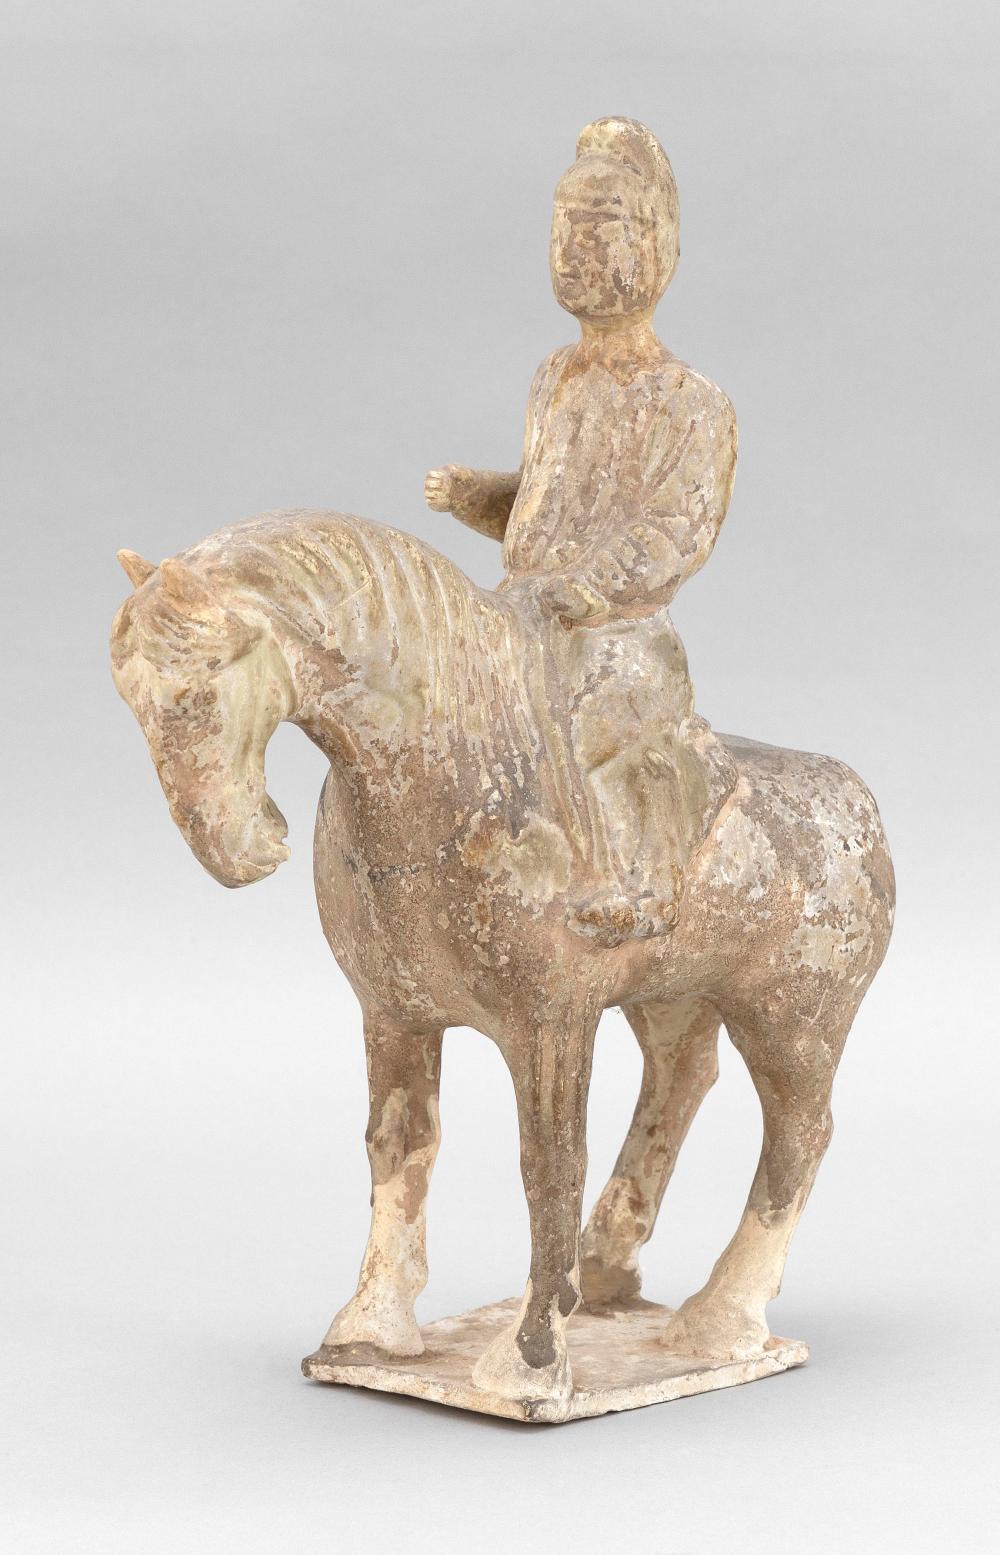 TANG POTTERY FIGURE OF A HORSE 34c0d5